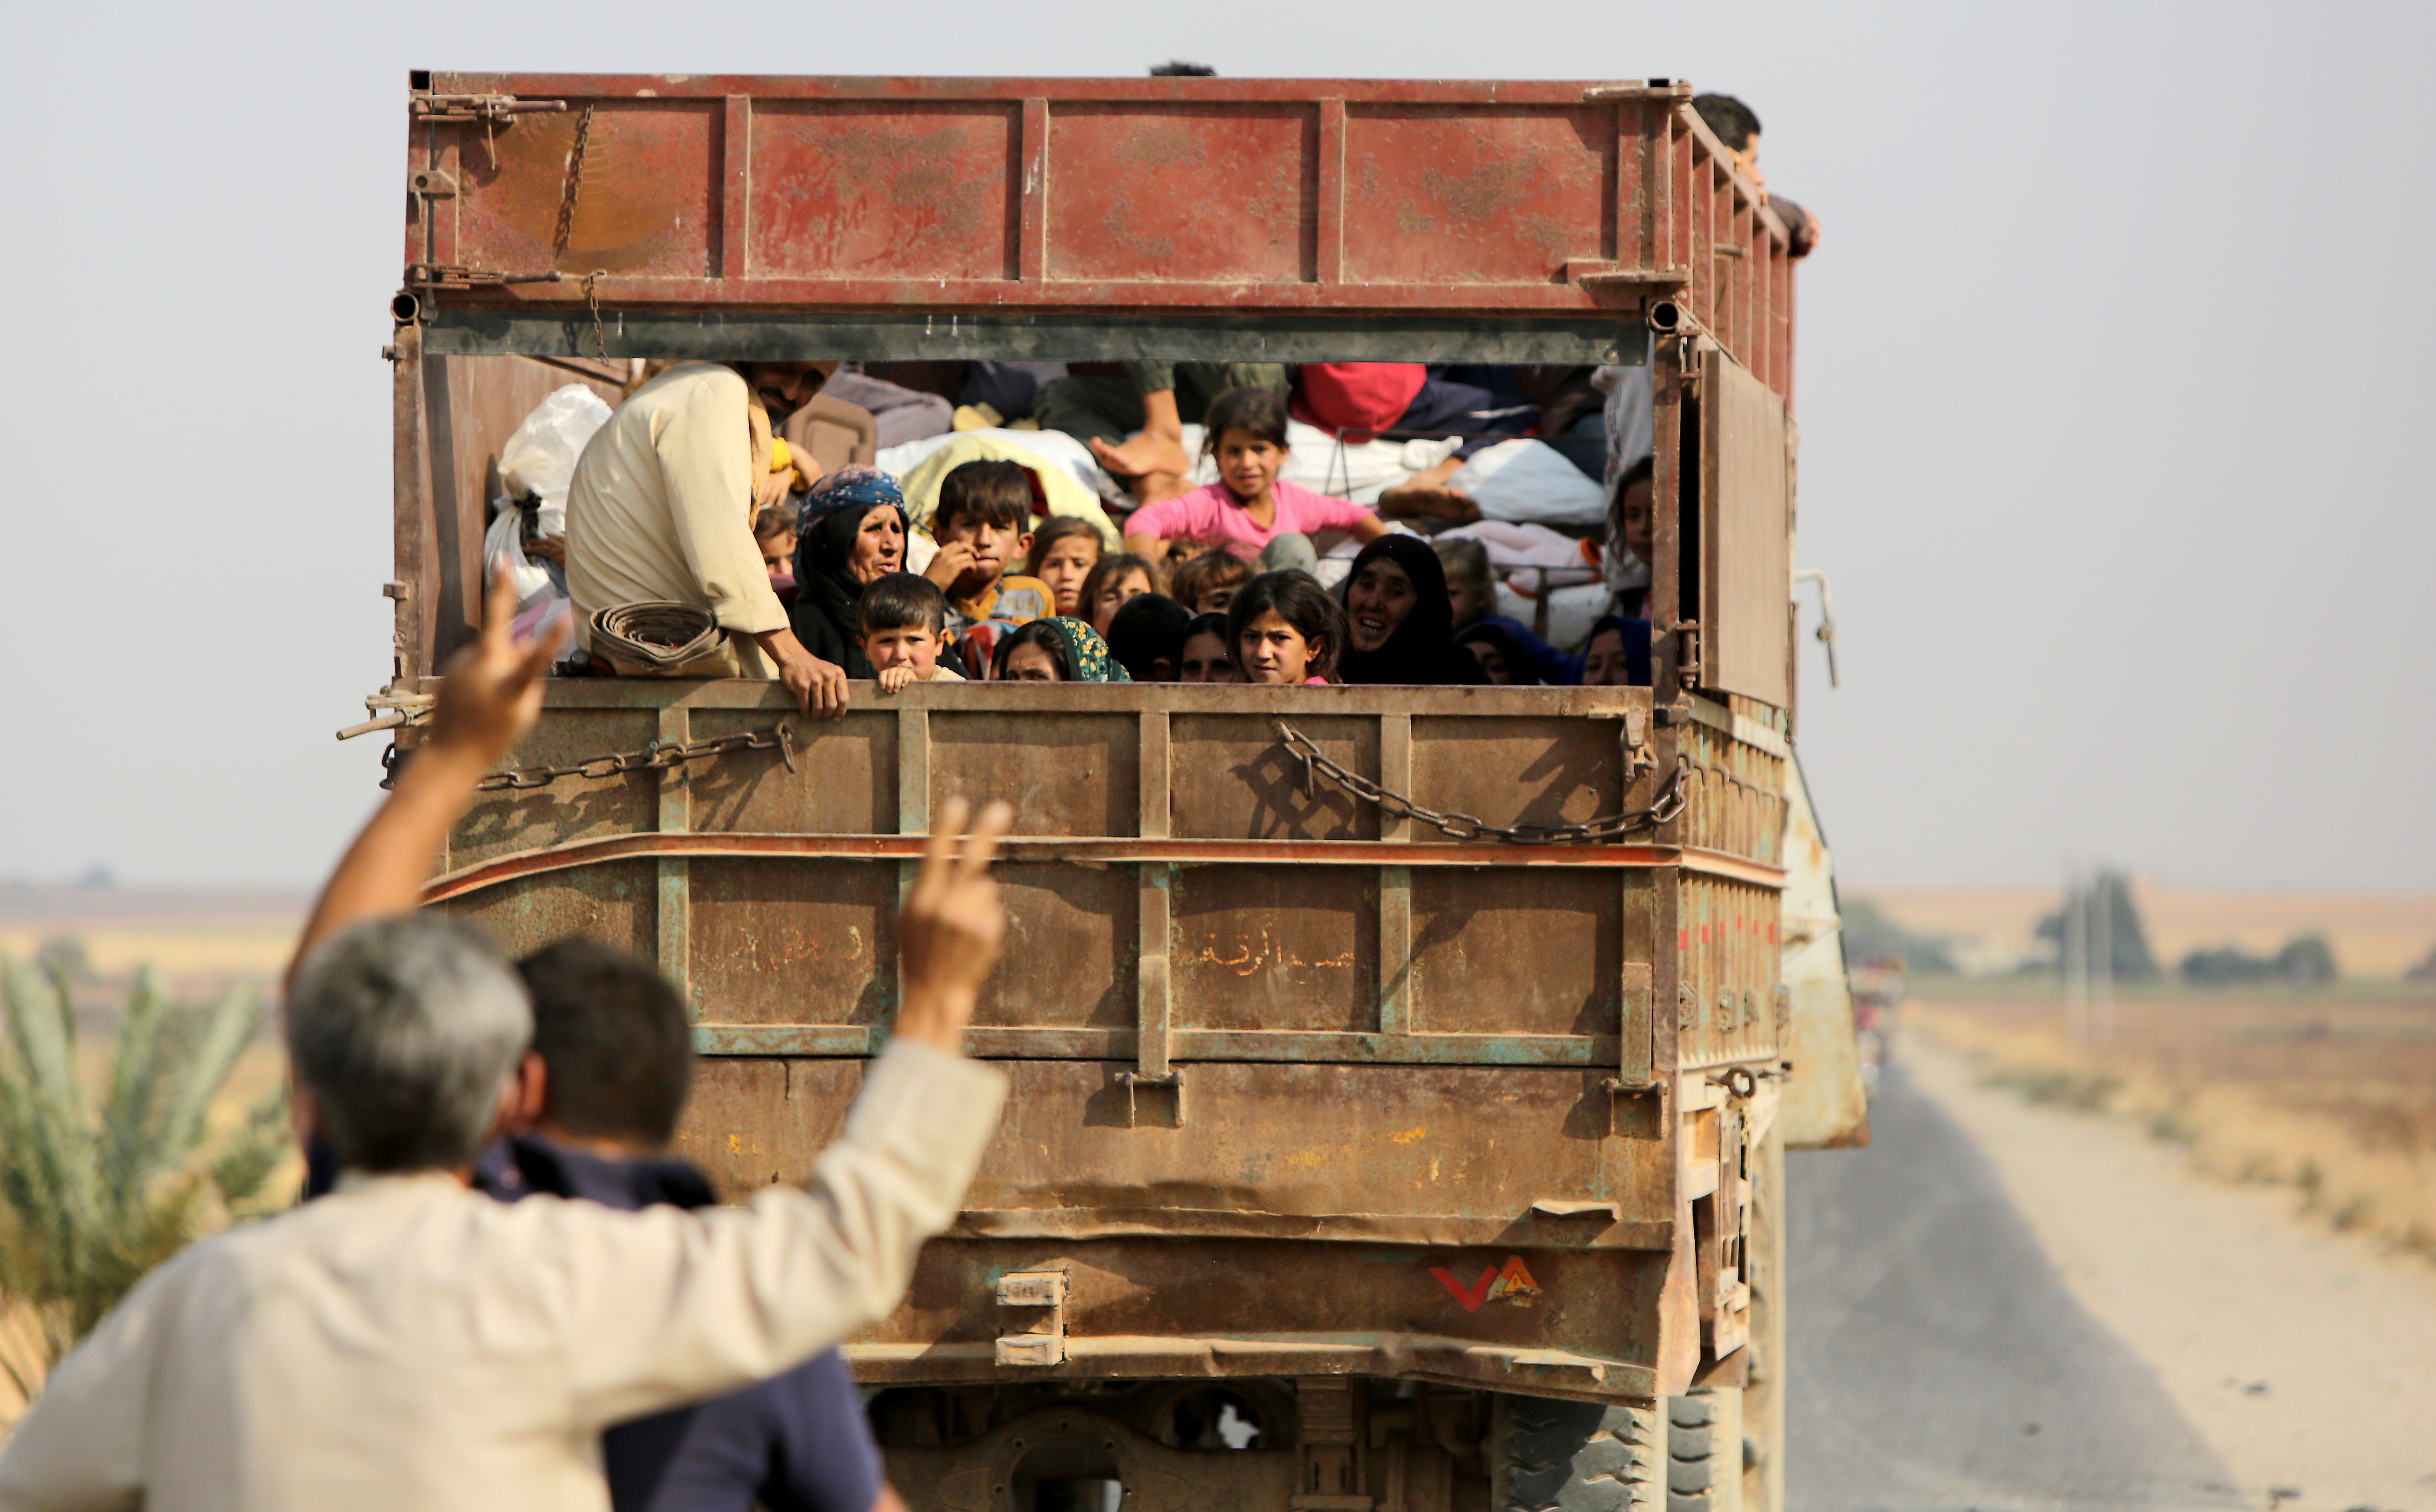 Kurdish Syrian civilians flee the town of Kobani on the Turkish border on October 16, 2019 as Turkey and its allies continue their assault on Kurdish-held border towns in northeastern Syria. (Photo by BAKR ALKASEM/AFP via Getty Images)